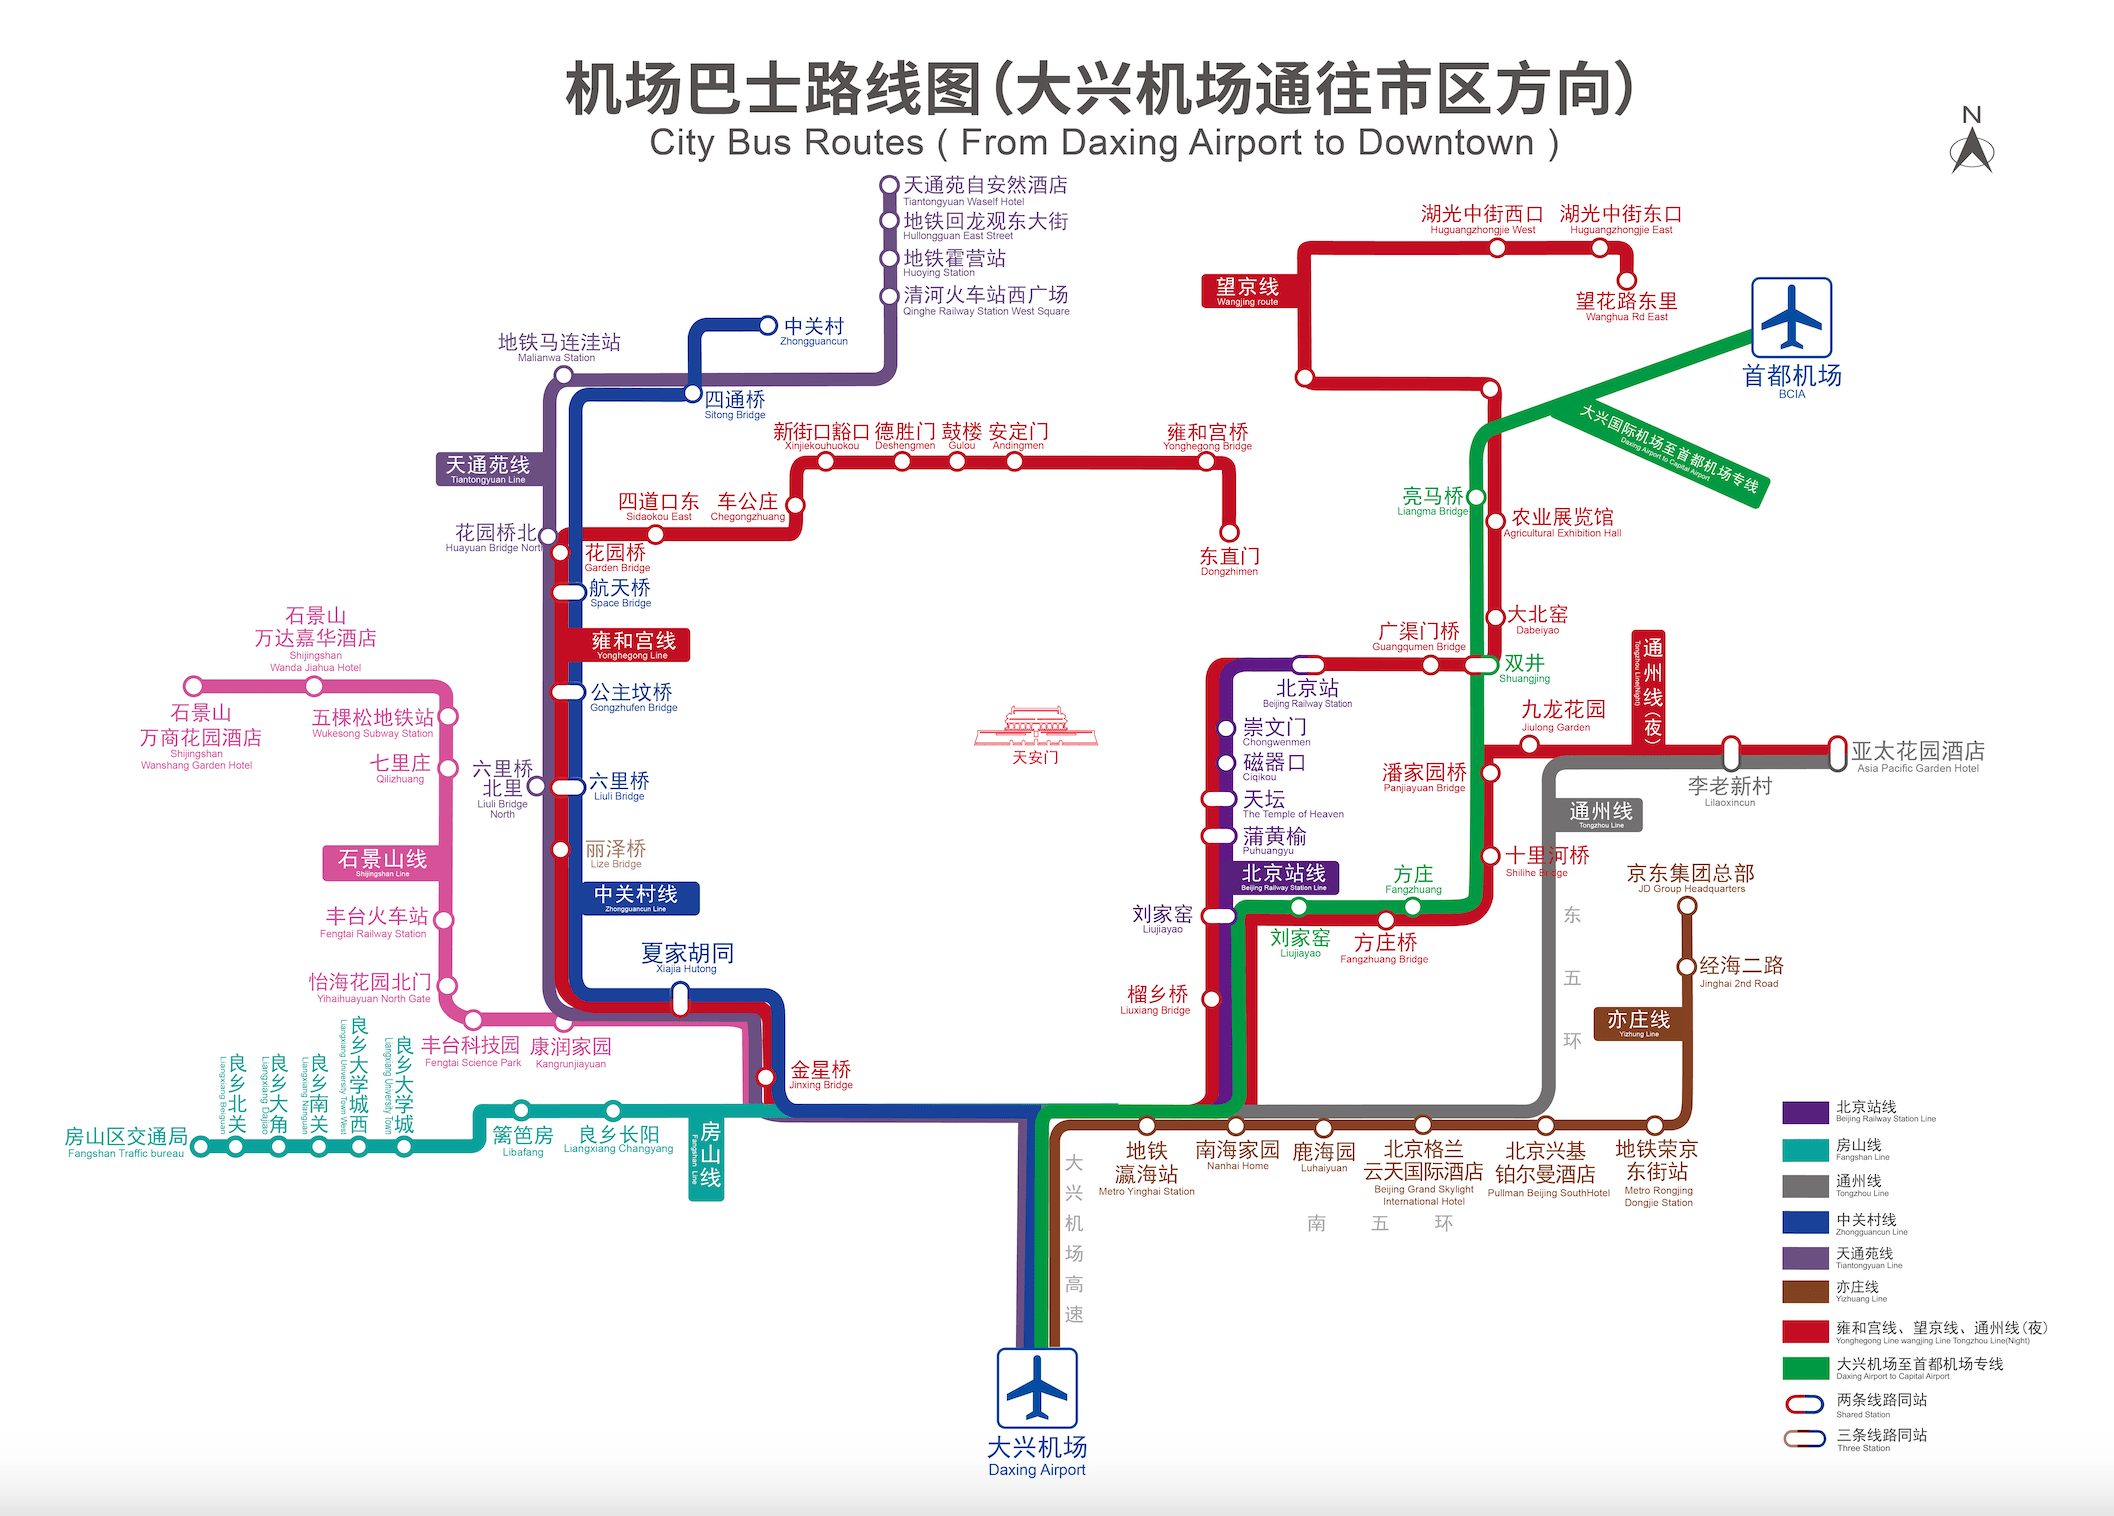 City Bus Routes(From Daxing Airport to Downtown)